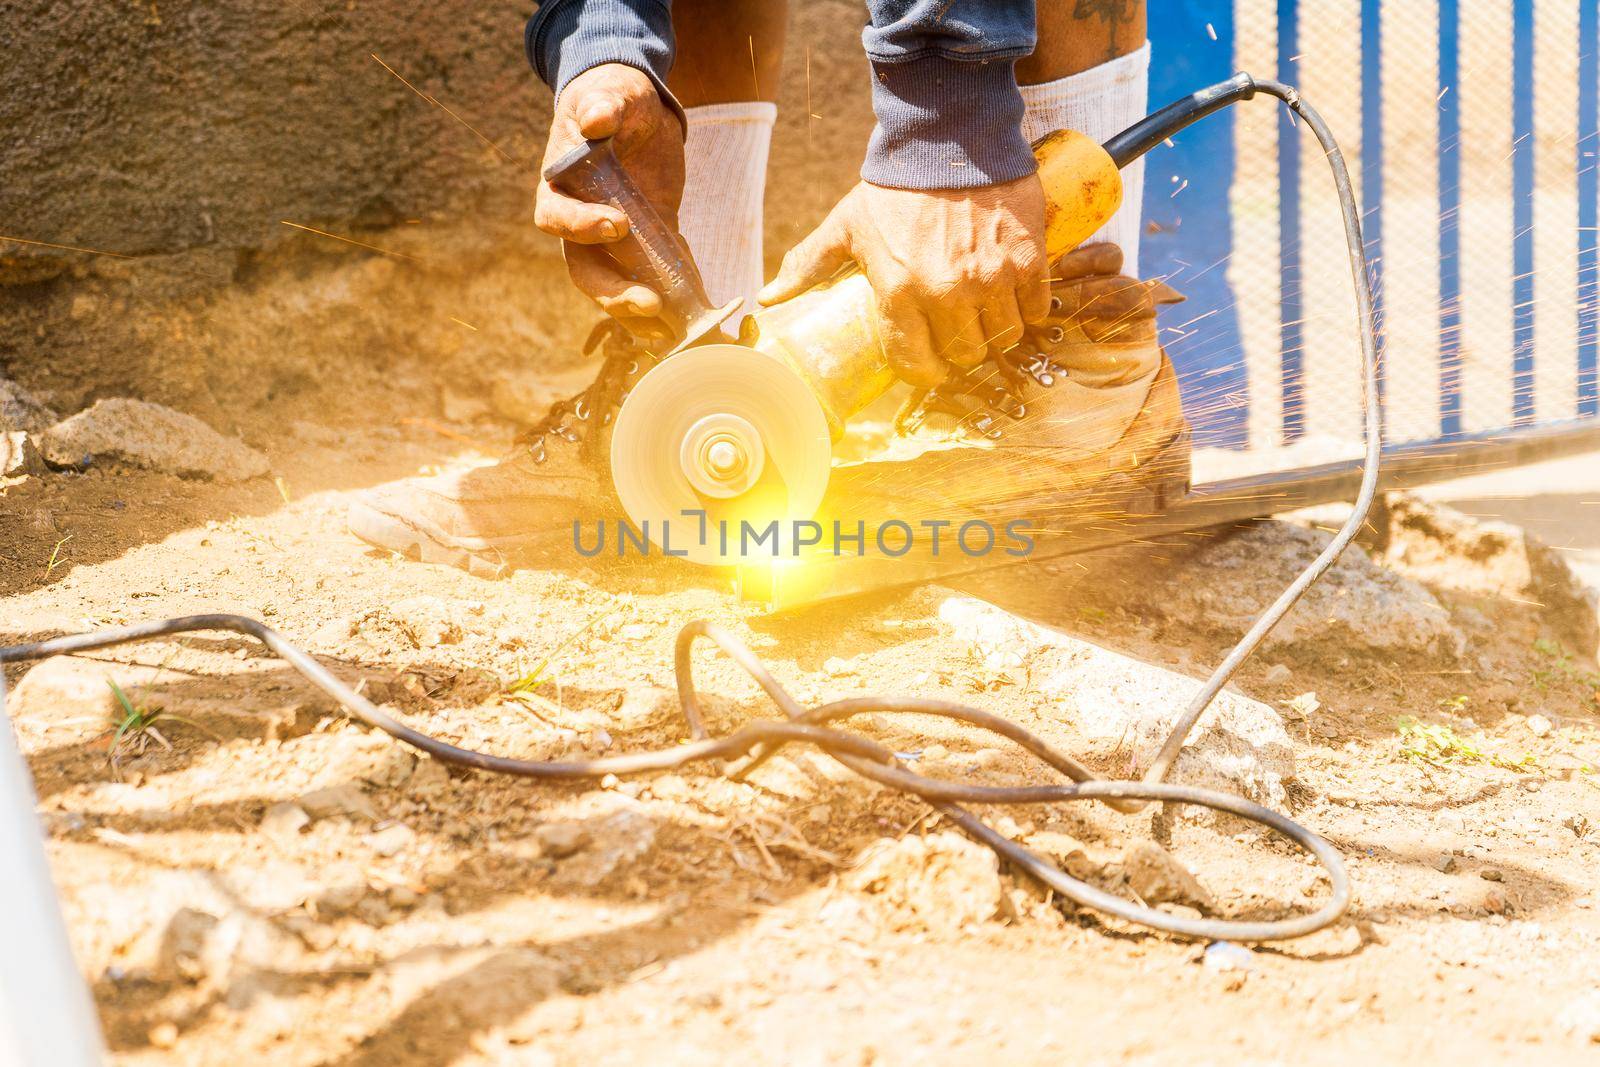 Closeup of the hands of a latin blue collar worker using a handheld circular saw to cut a tube in the dirt floor